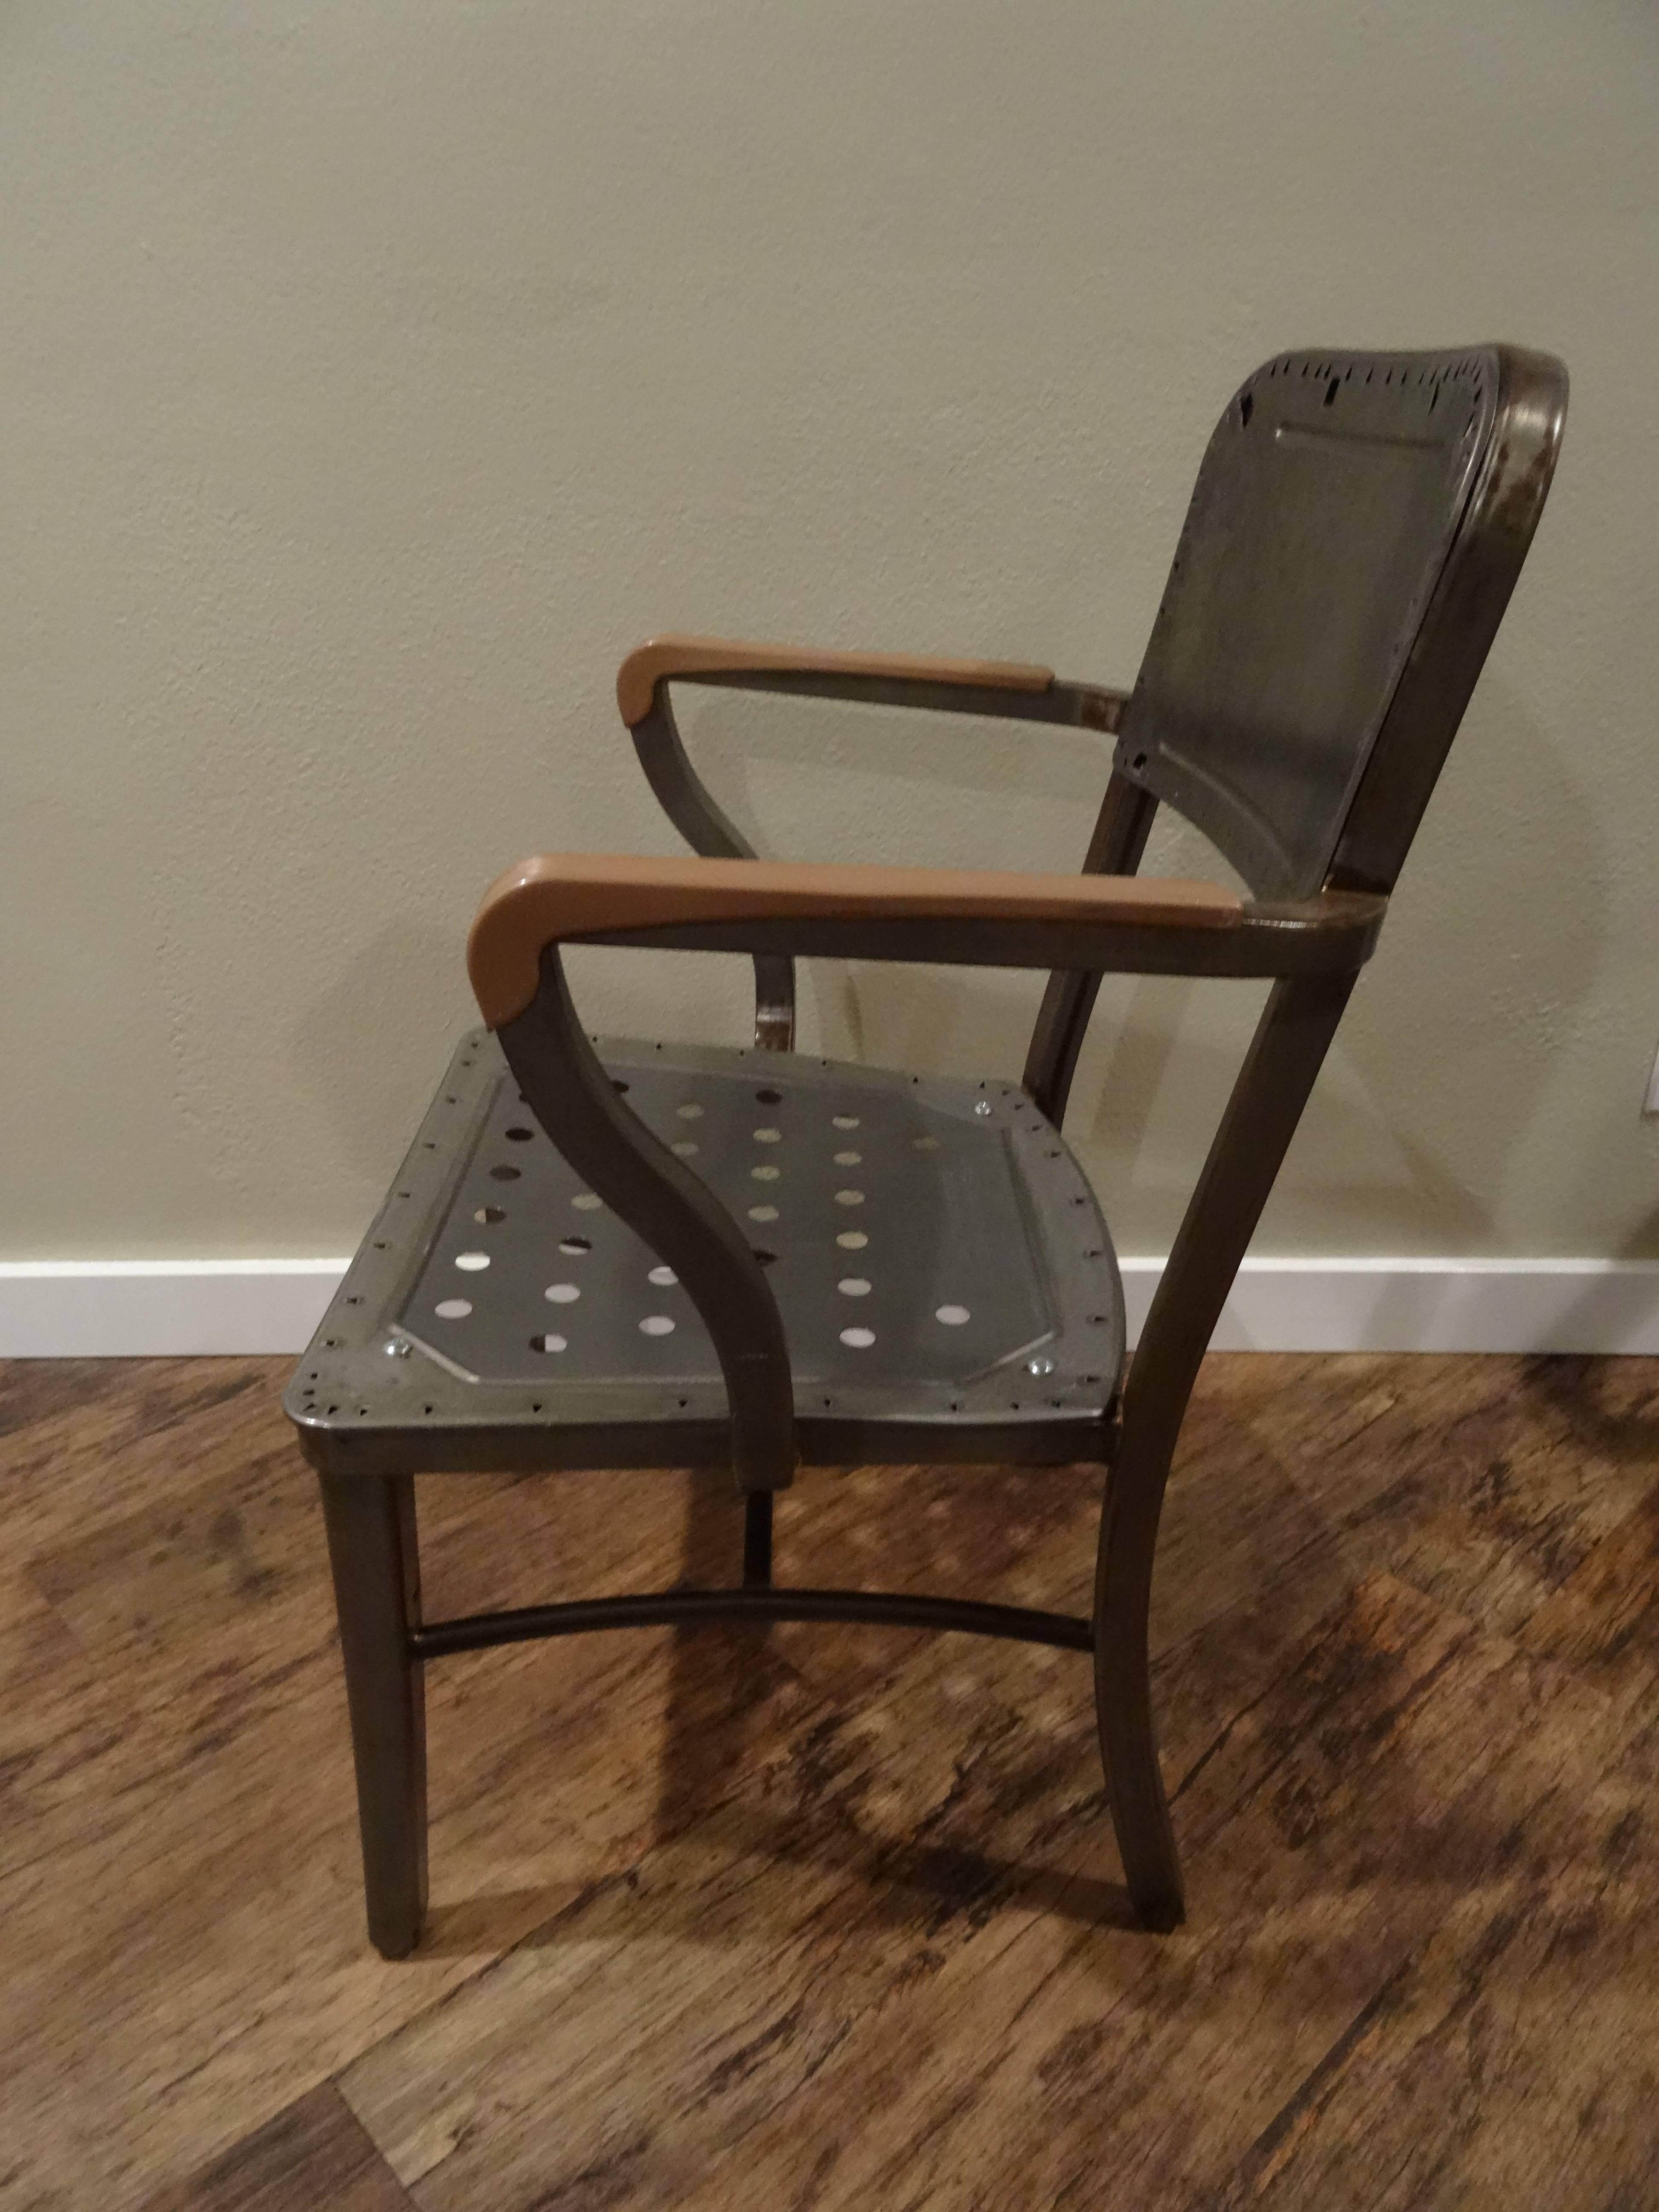 Metal Steelcase Chair In Good Condition For Sale In Spokane, WA